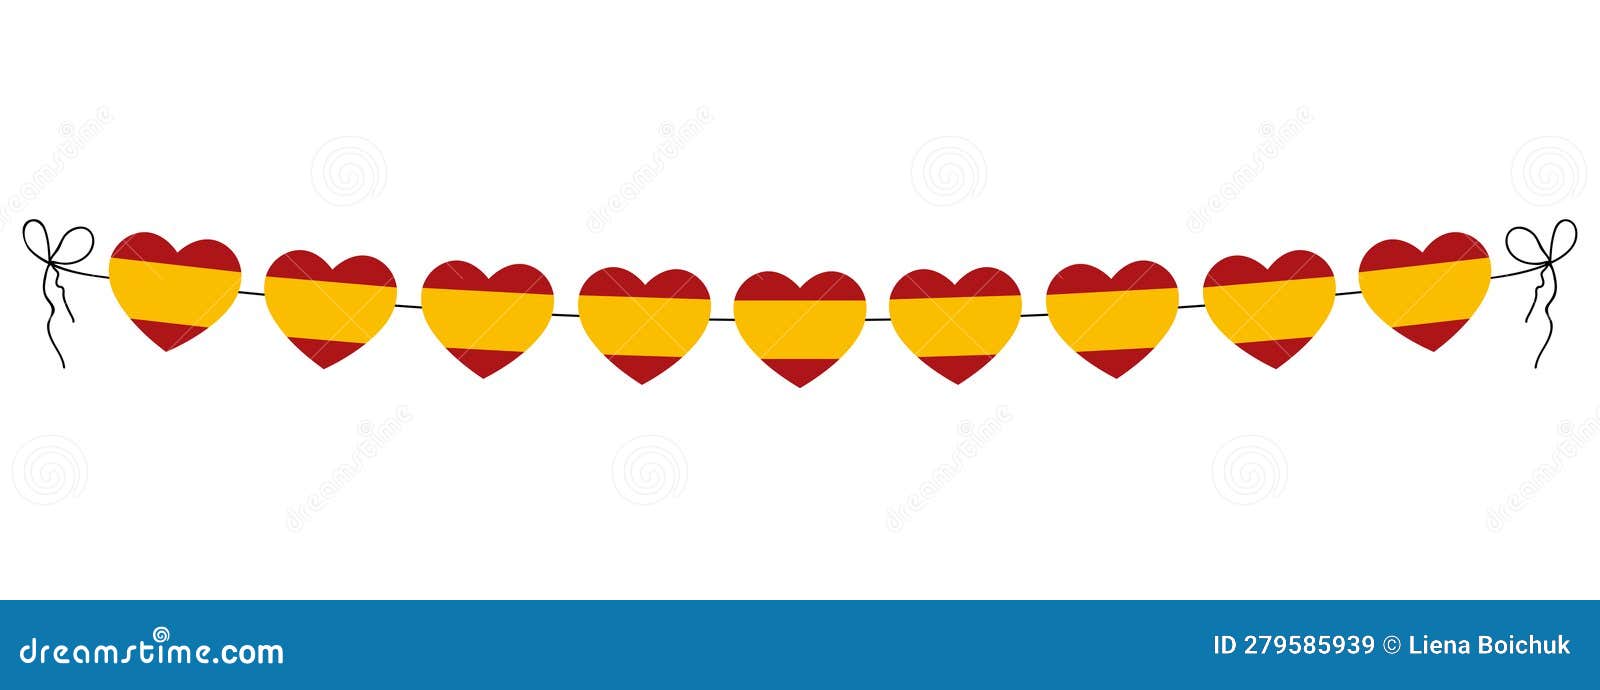 spanish national day, flag of spain hearts garland, string of hearts for outdoor party, decorative  